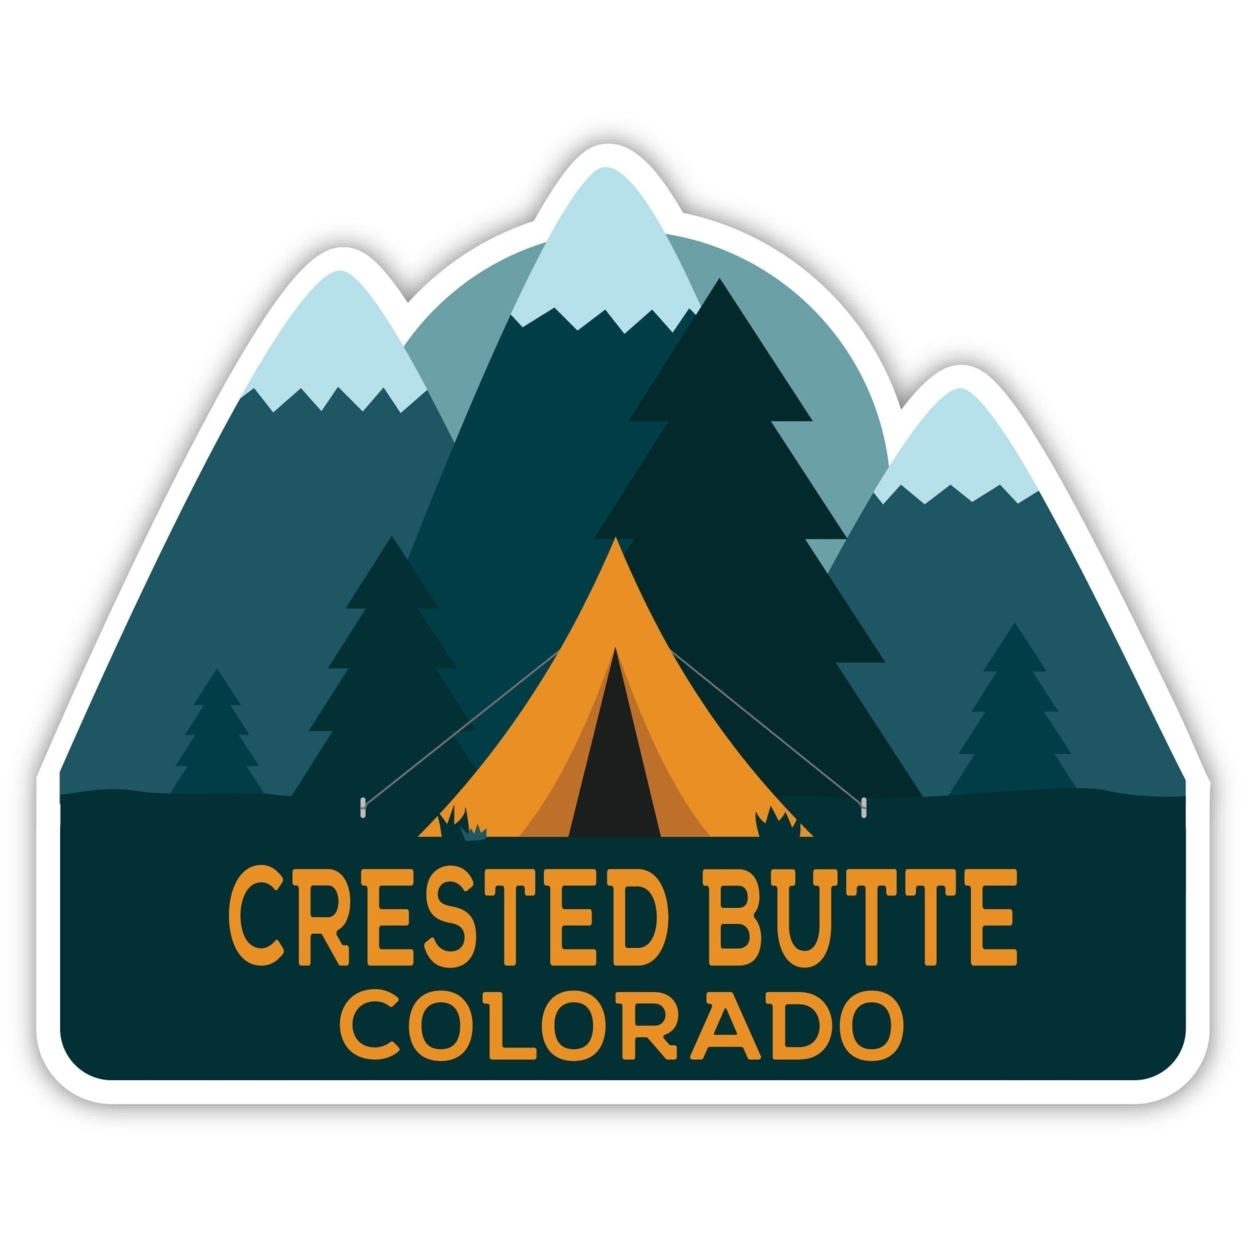 Crested Butte Colorado Souvenir Decorative Stickers (Choose Theme And Size) - 4-Pack, 8-Inch, Tent